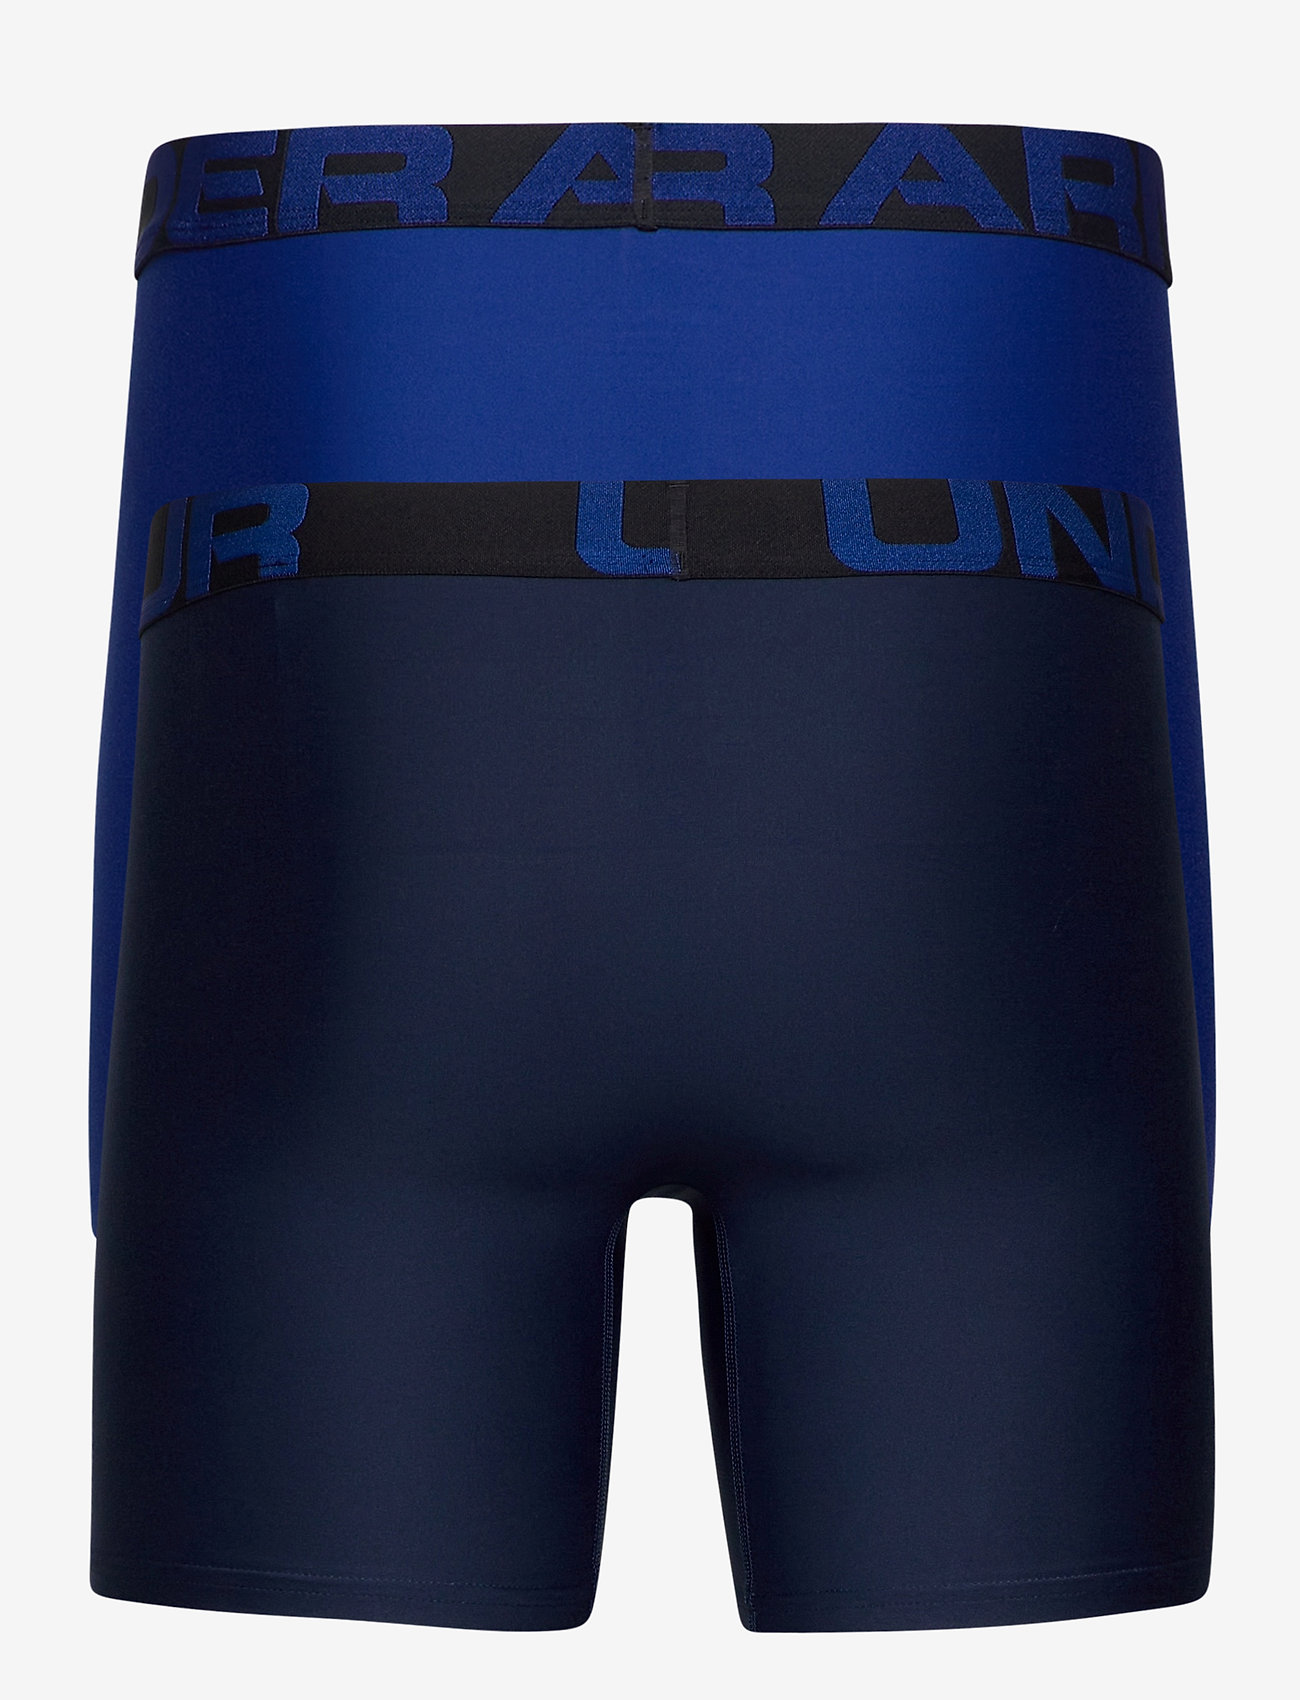 Under Armour - UA Tech 6in 2 Pack - boxer briefs - royal - 1